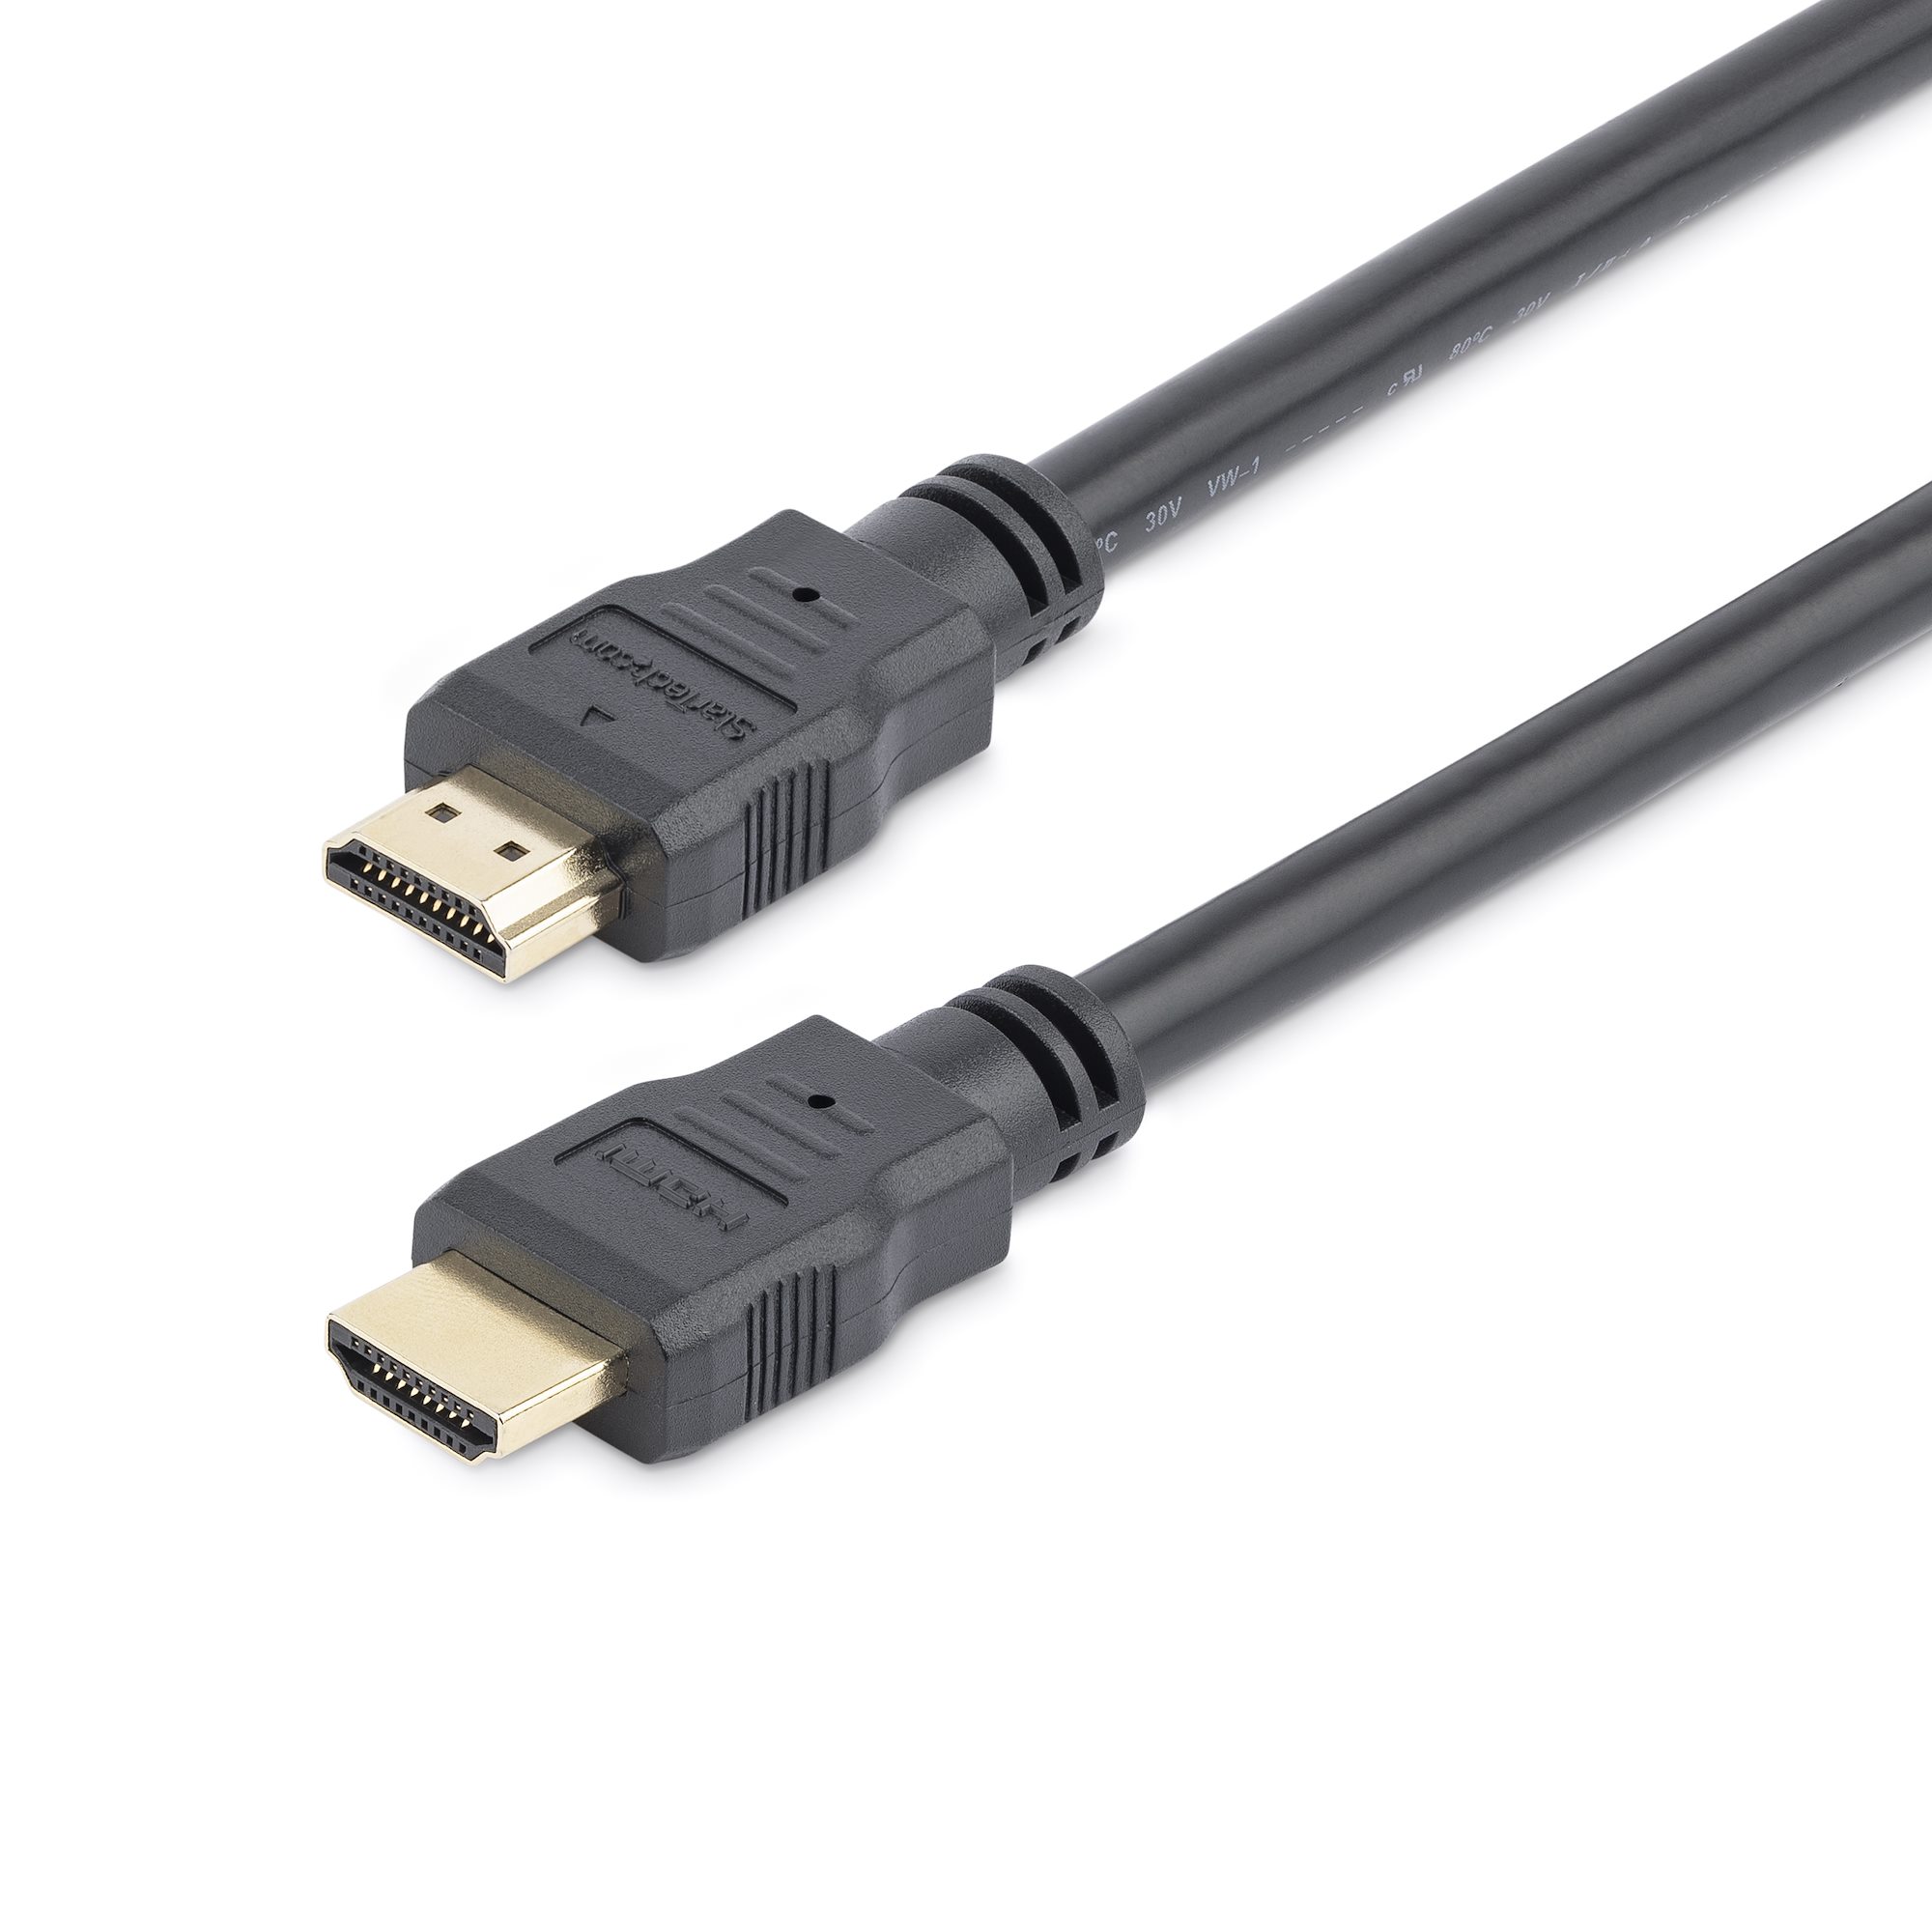 8ft 4K High Speed HDMI Cable - HDMI 1.4 - HDMI® Cables & HDMI Adapters StarTech.com